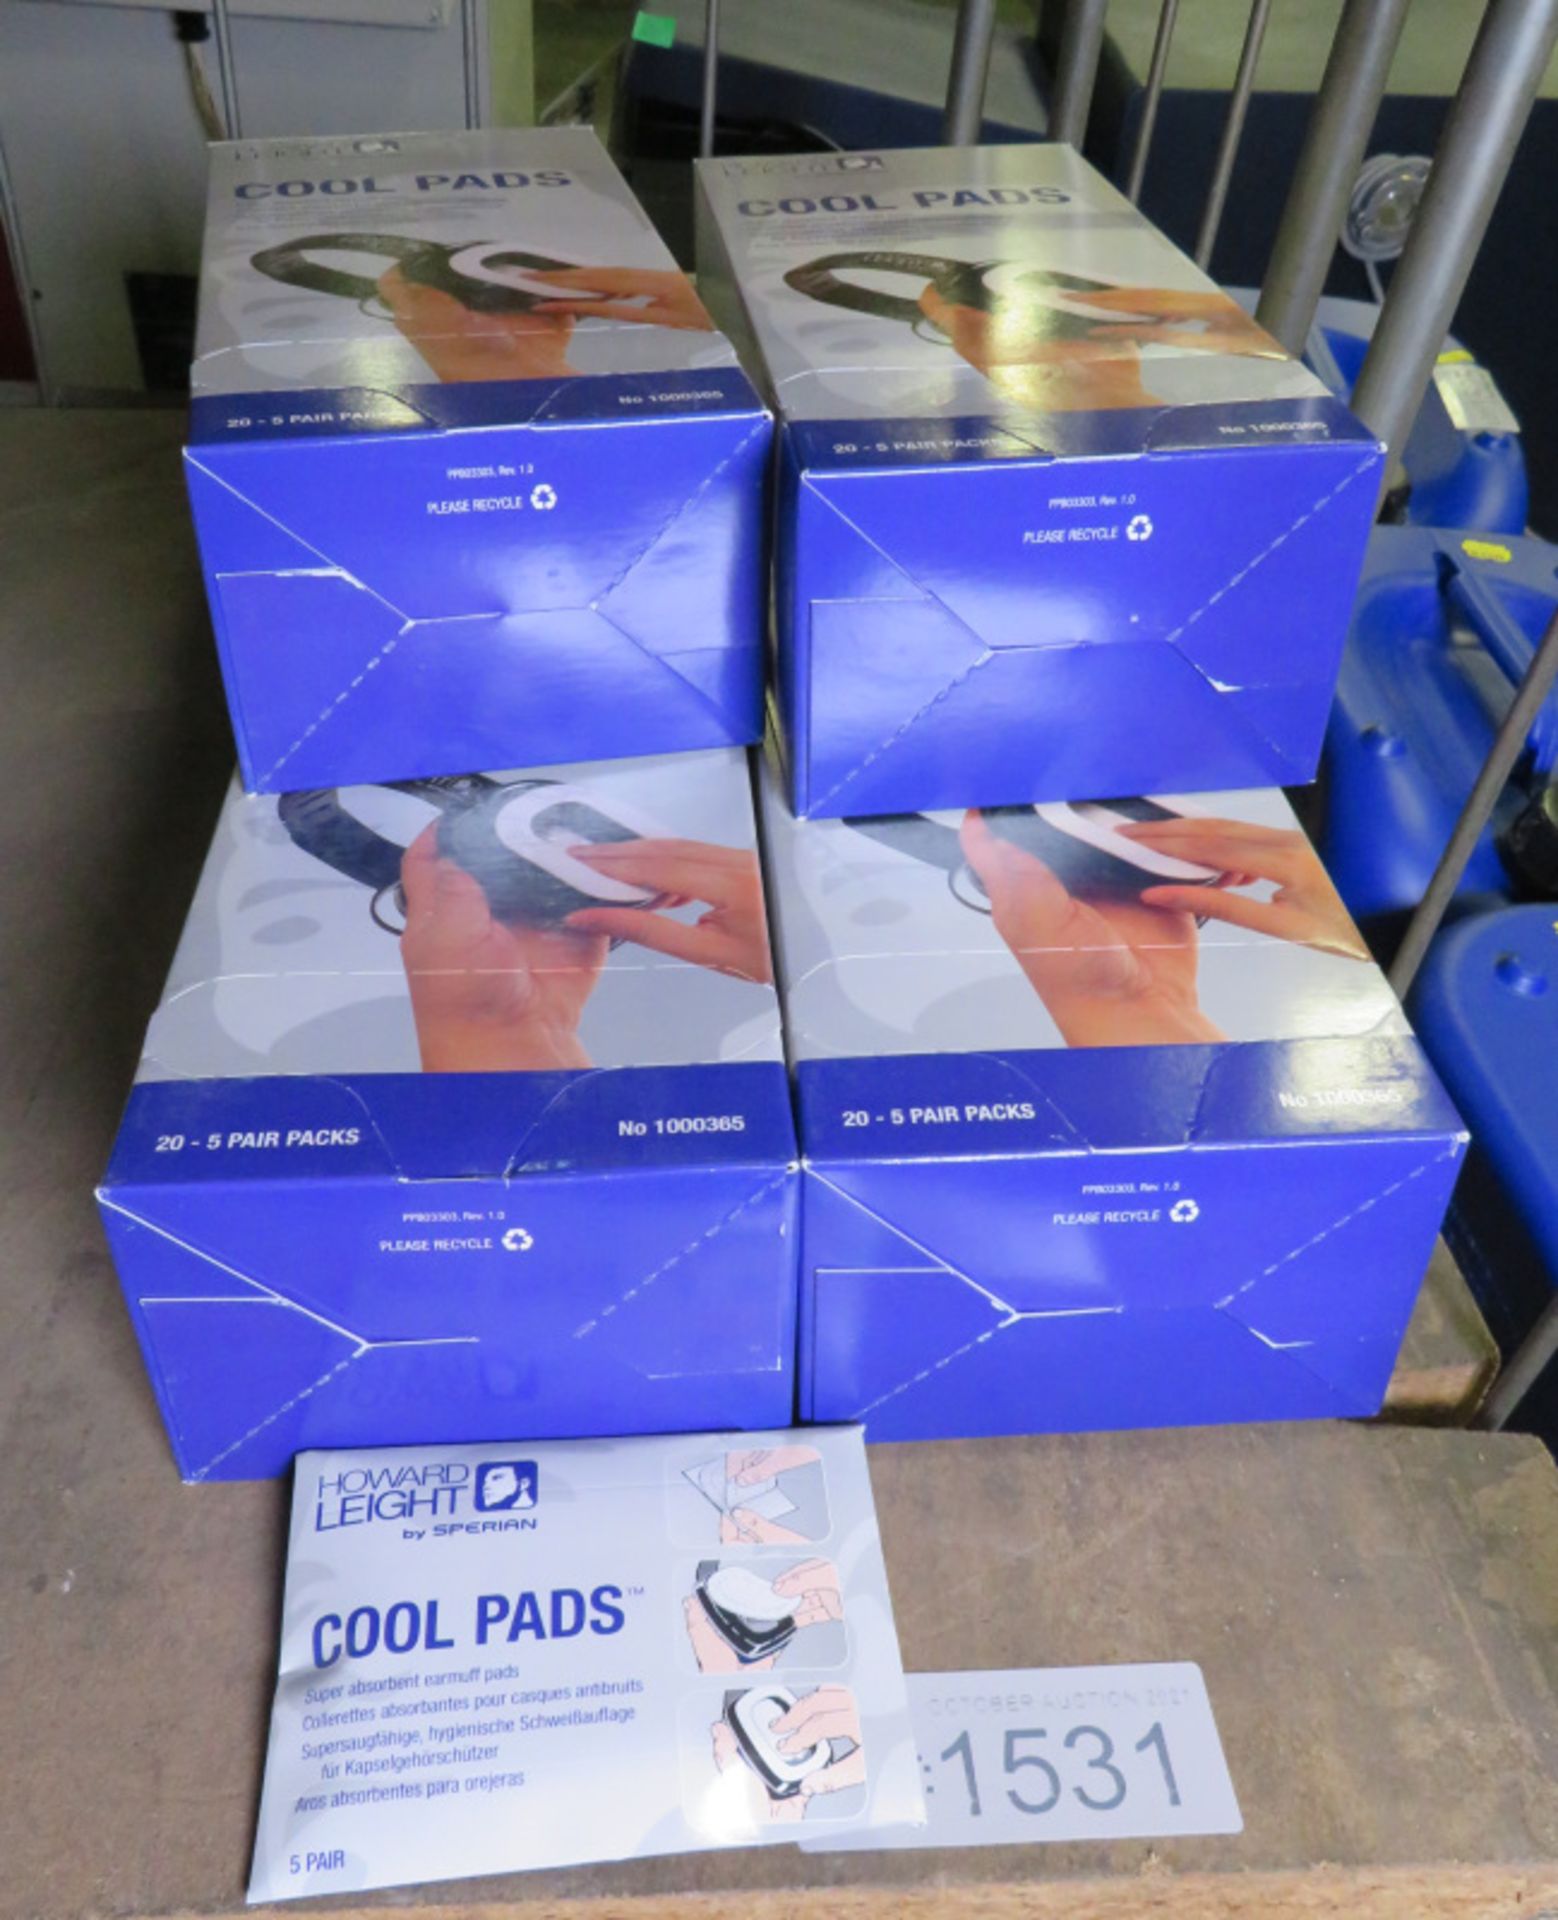 Howard Leight Coolpads - 6 boxes - 20 - 5 pair packs per box